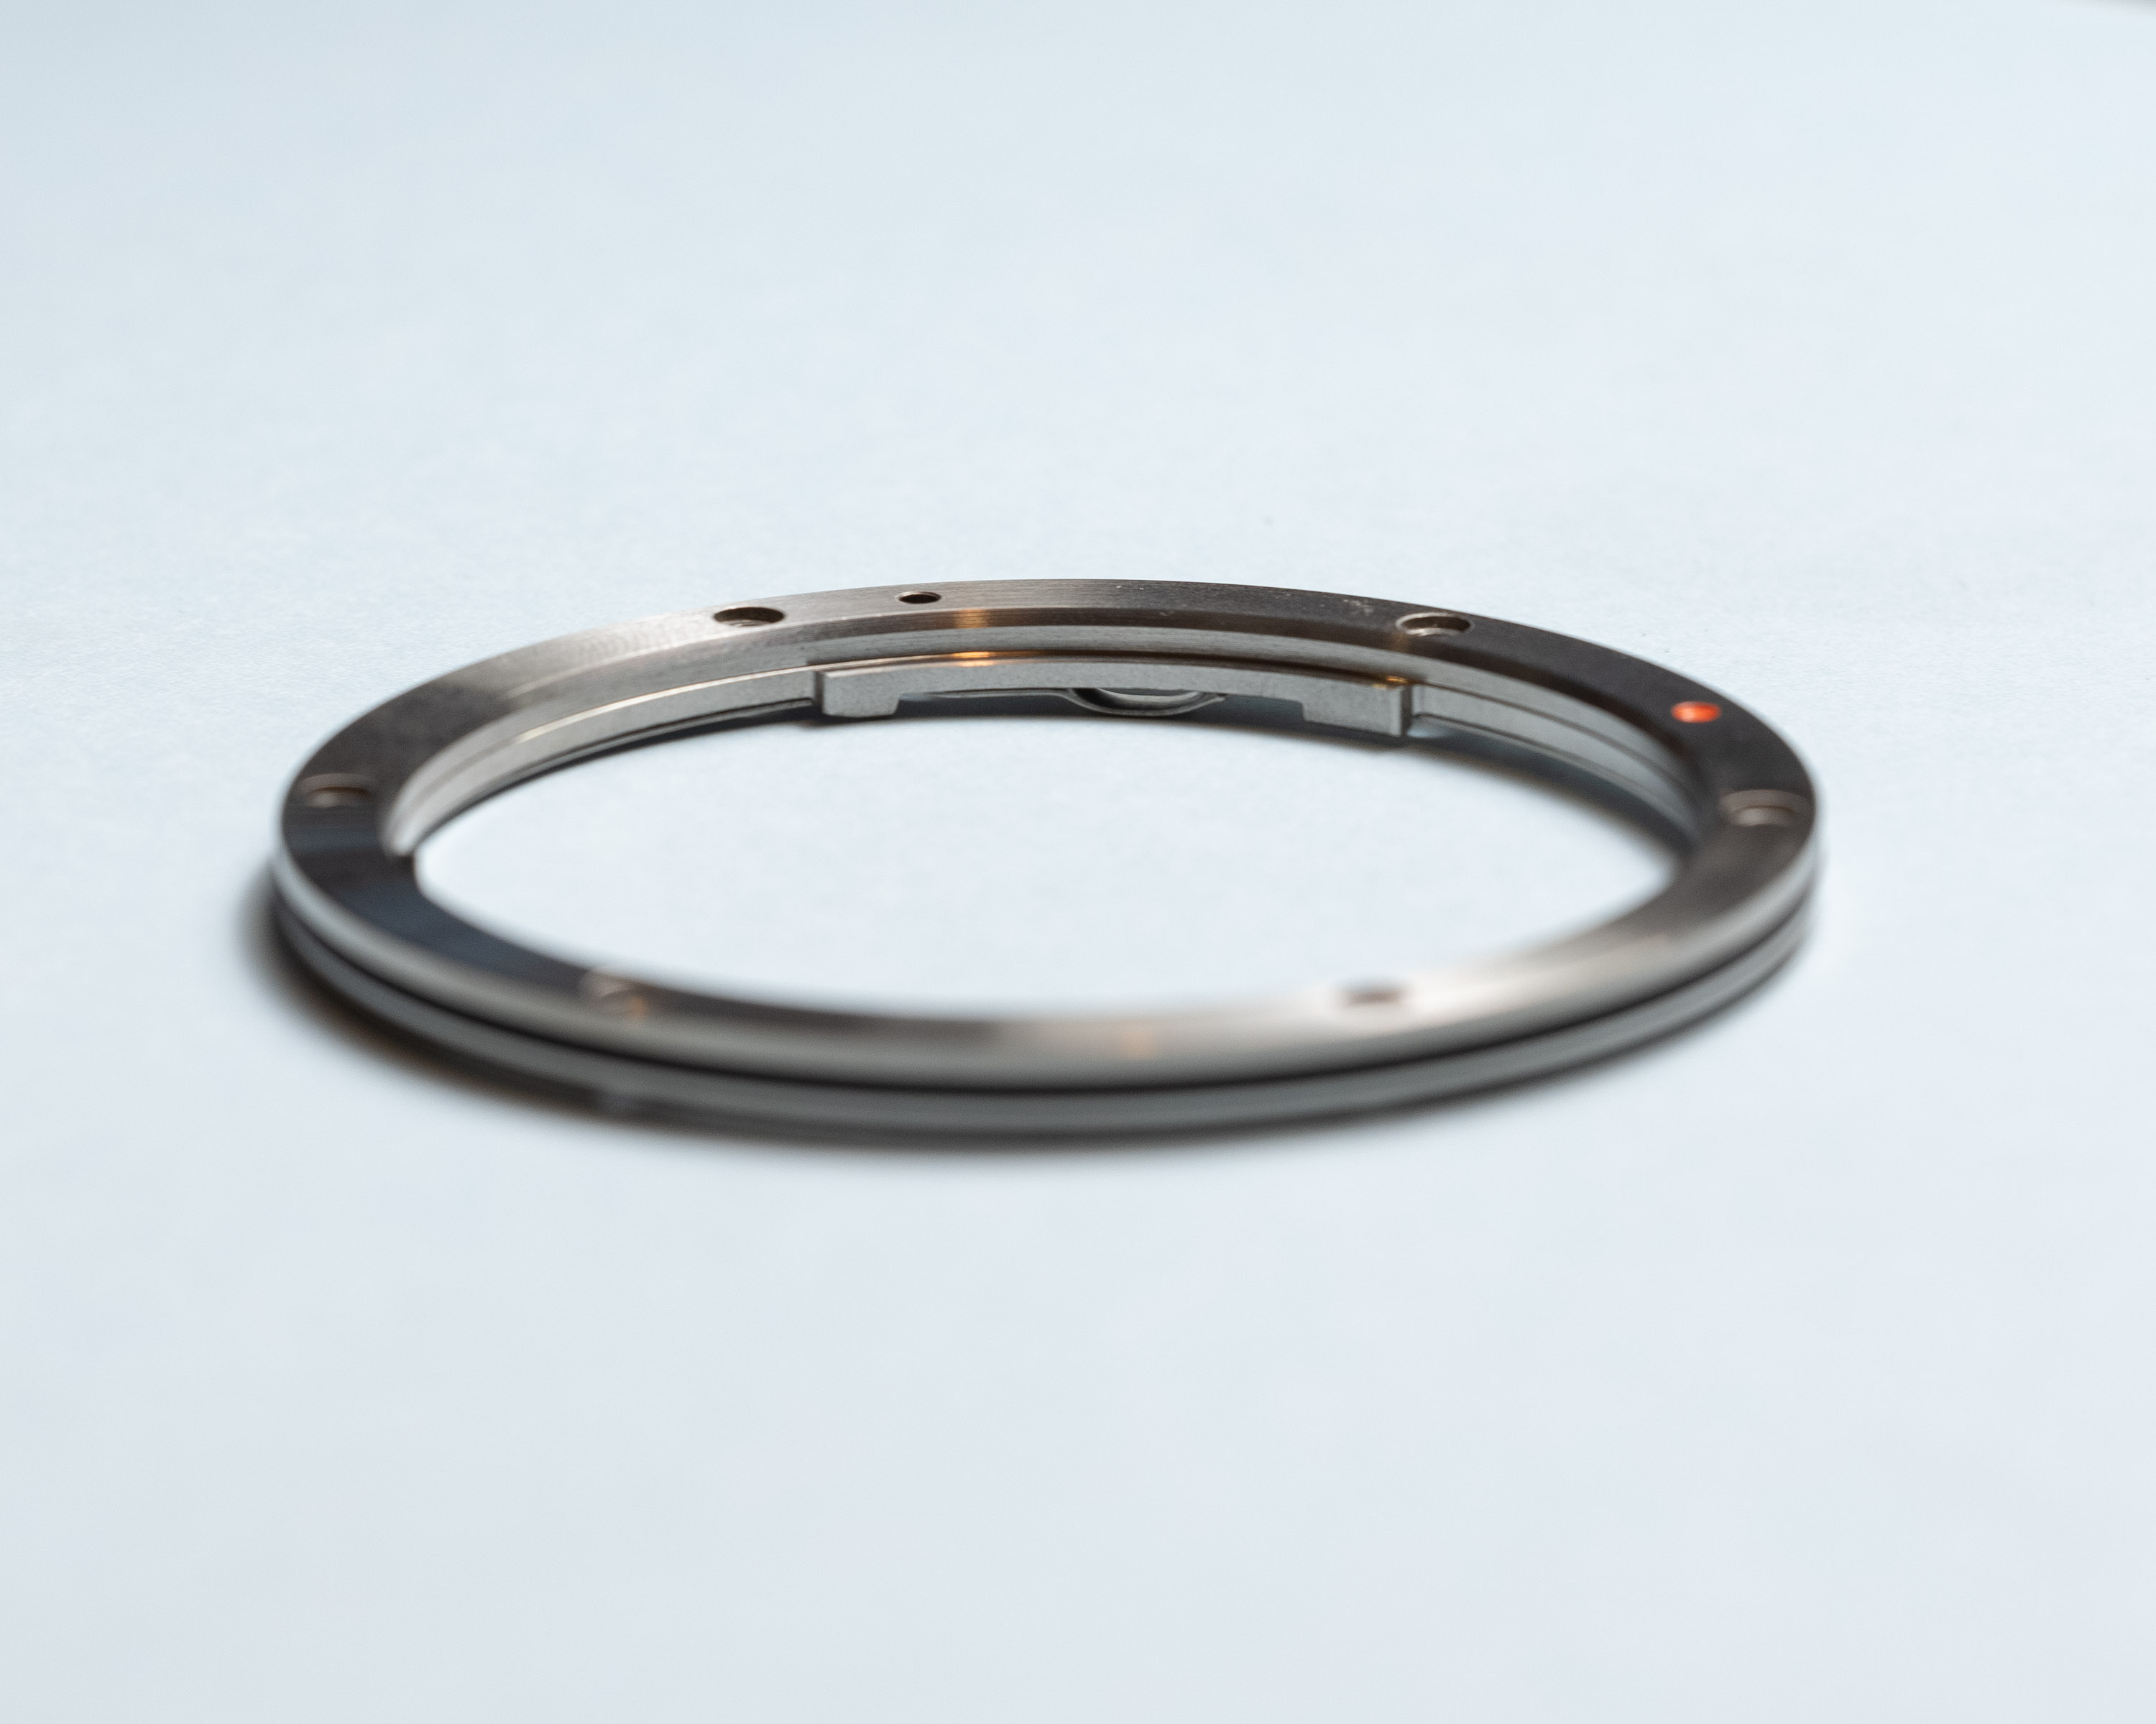 Side view of metal ring with polished silver appearance, flexible retention plate